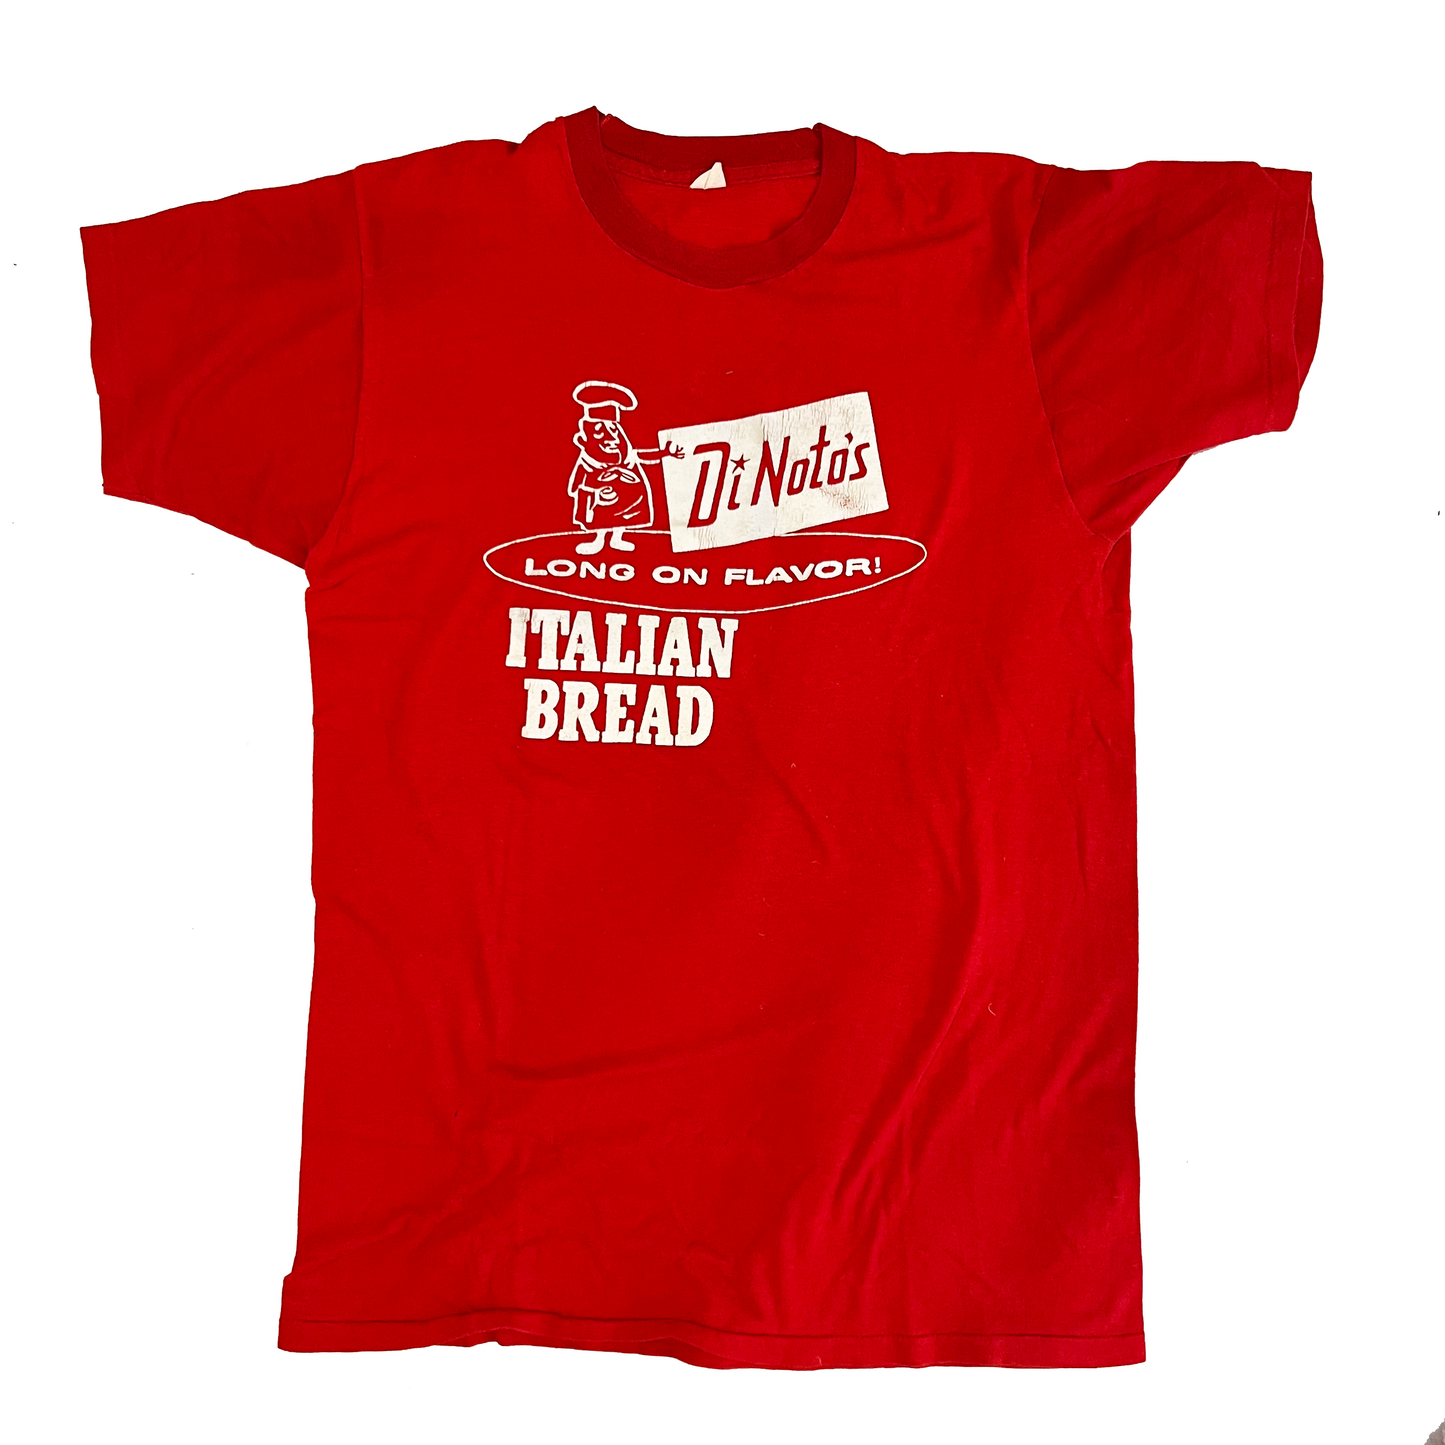 2023 OSR Bread Route Race T - The Original with Upside Competitor's Logo